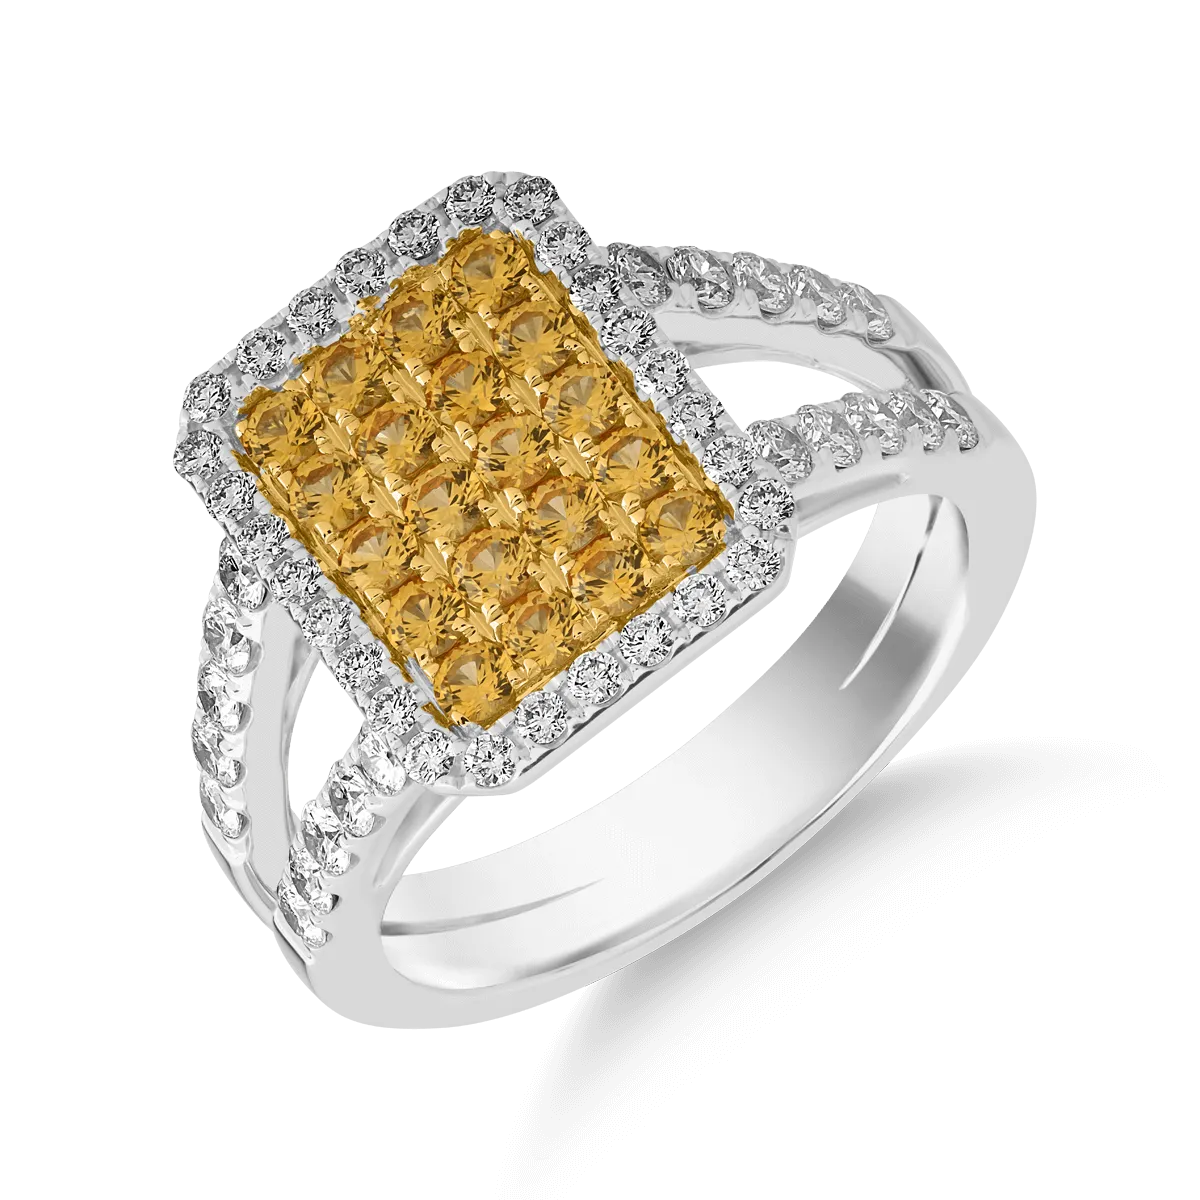 18K white-yellow gold ring with 0.67ct yellow sapphires and 0.69ct diamonds